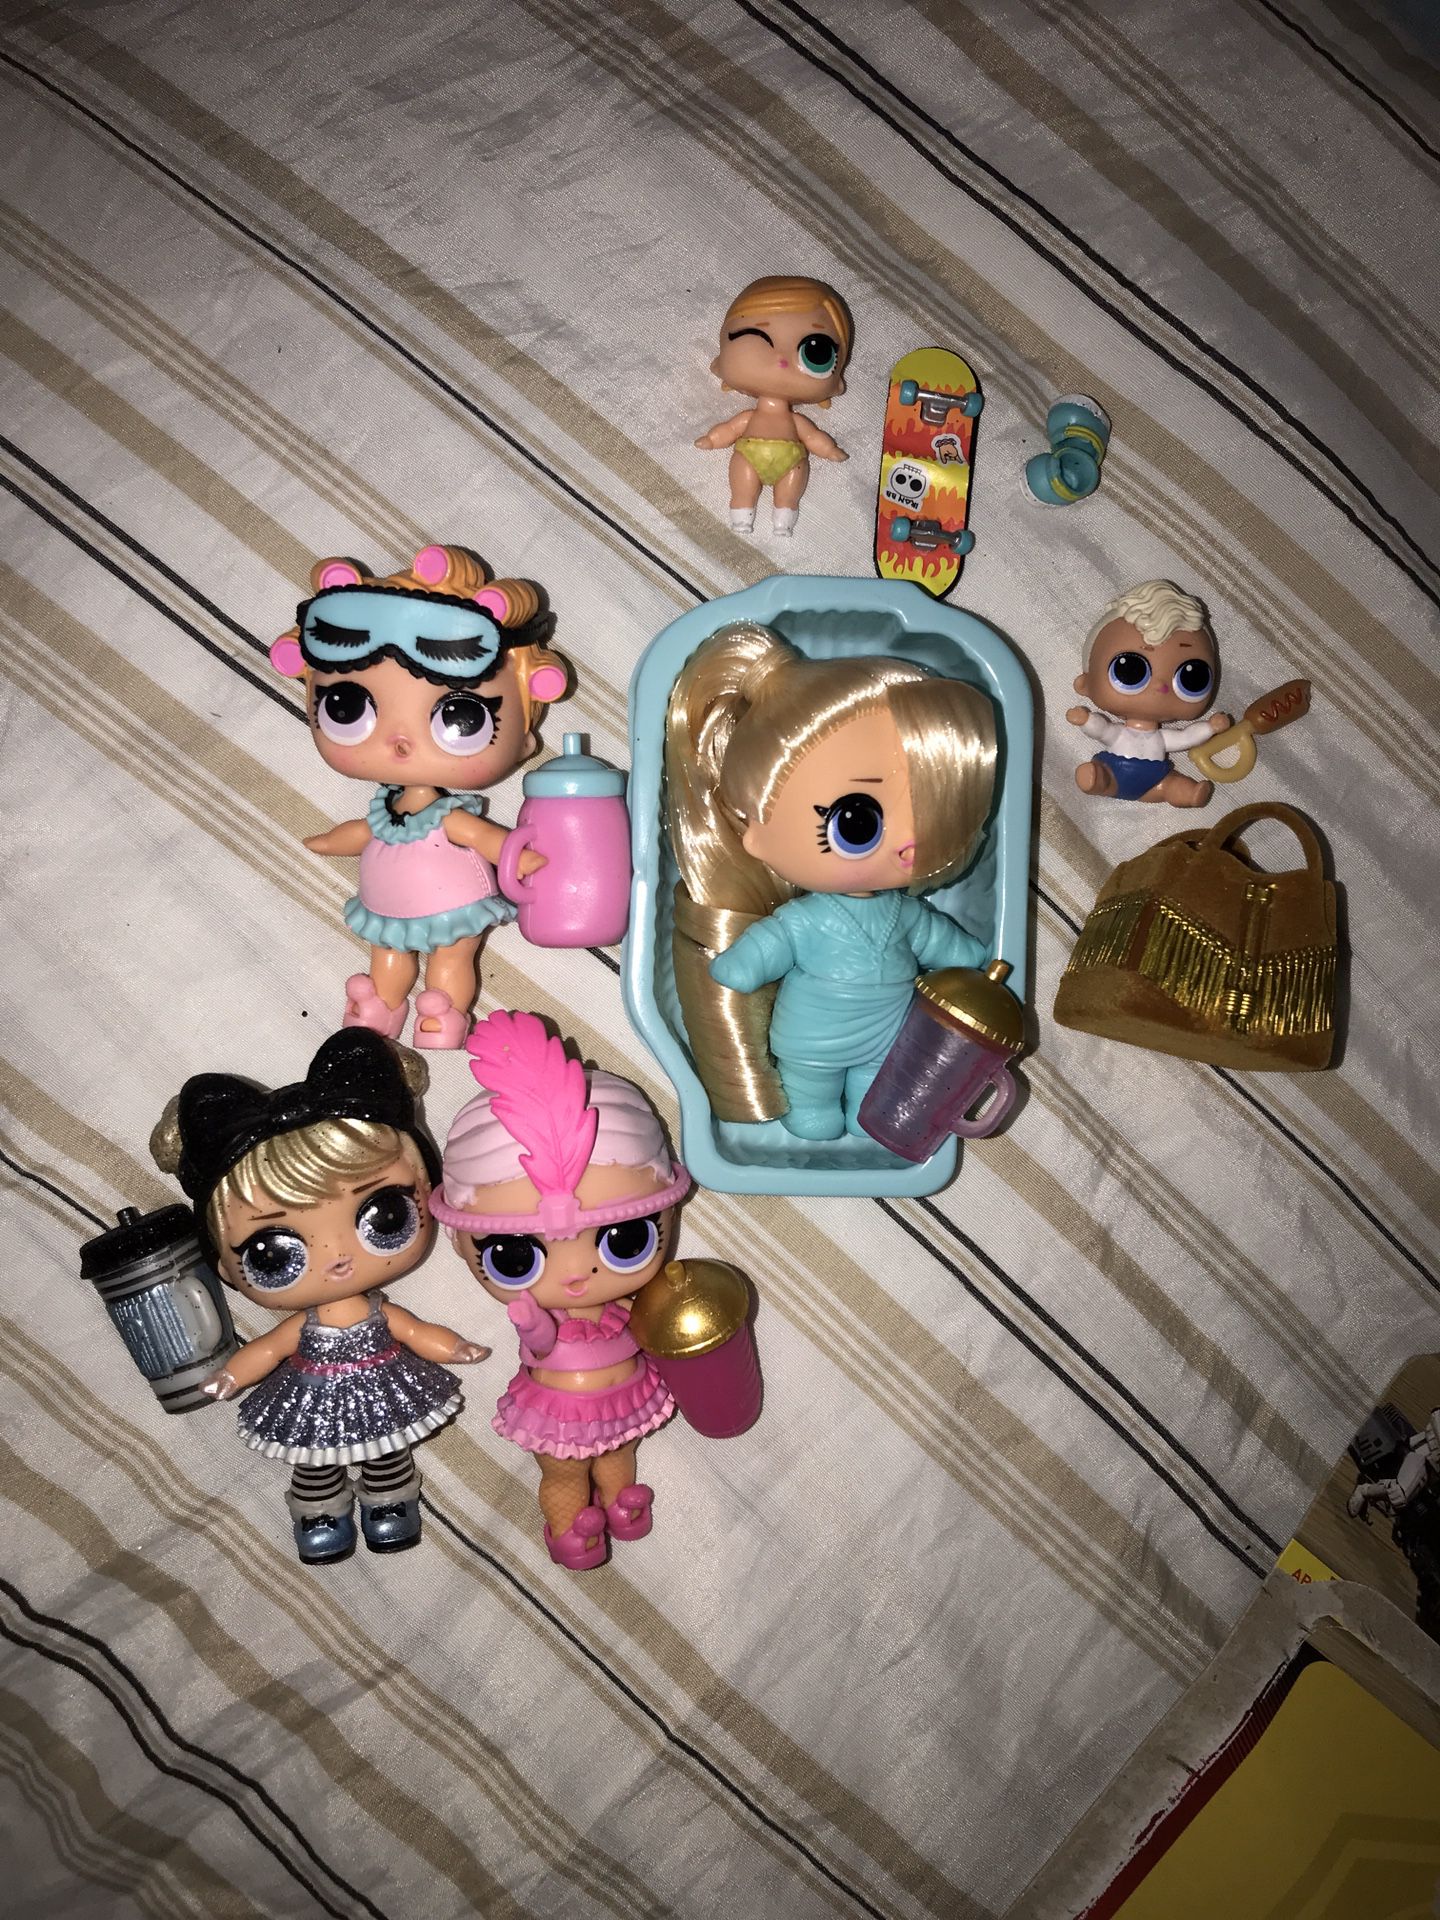 Lol surprise dolls - 4 big sisters and 2 lils